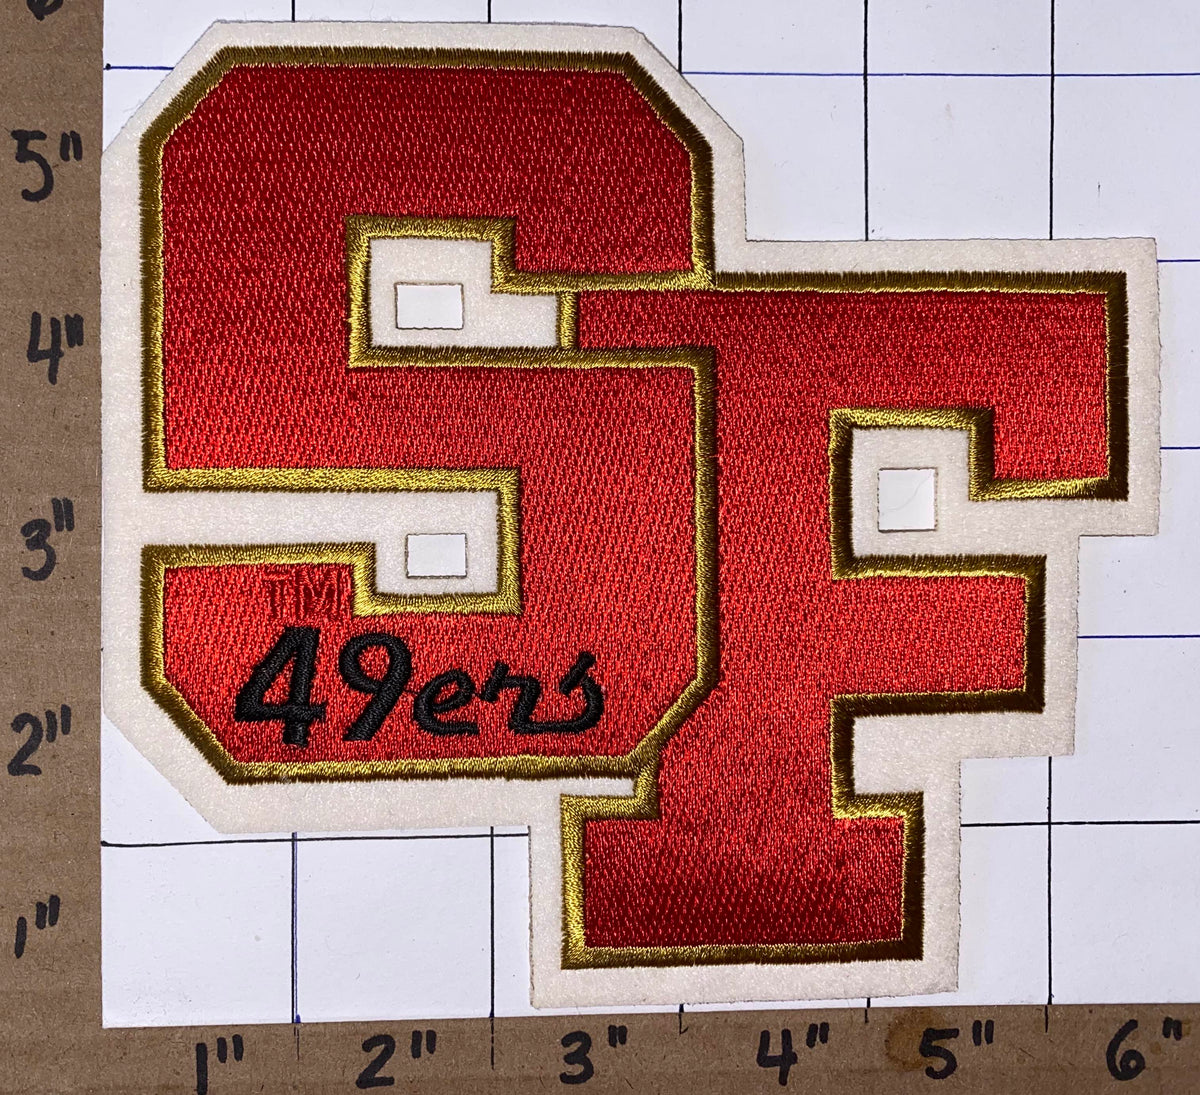 NFL San Francisco 49ers Iron or Sew-On Patch 3 X 1 5/8